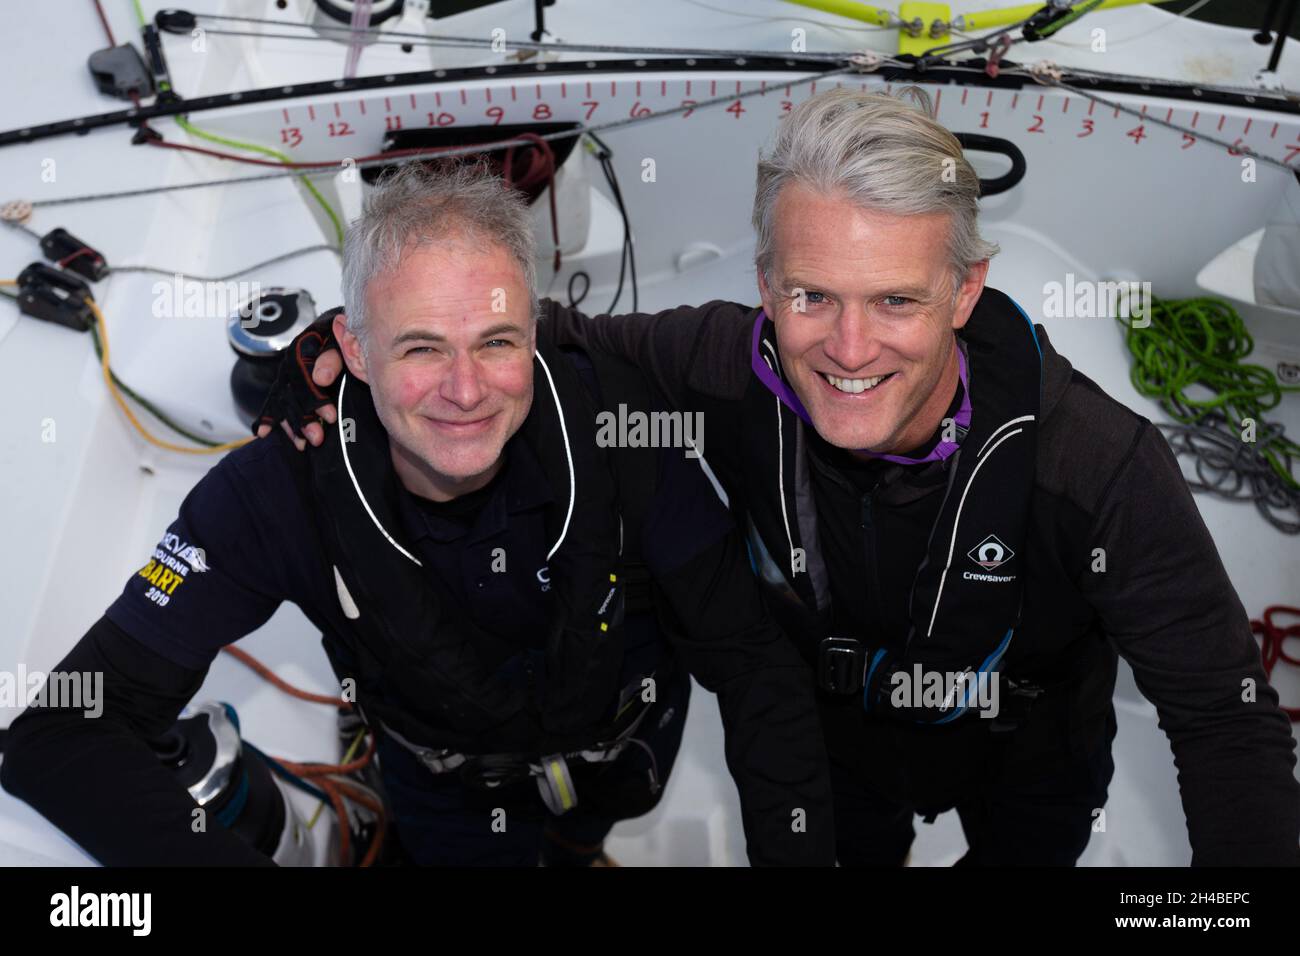 Crew member, Peter (l) and Skipper, Guillaume (r)pose on Lord Jiminy during the 2021 Return to Sailing Celebration Race organised by the Ocean Racing Club Of Victoria in Melbourne. Melbourne celebrates after ending the worlds longest and most draconian Covid lockdown. Stock Photo